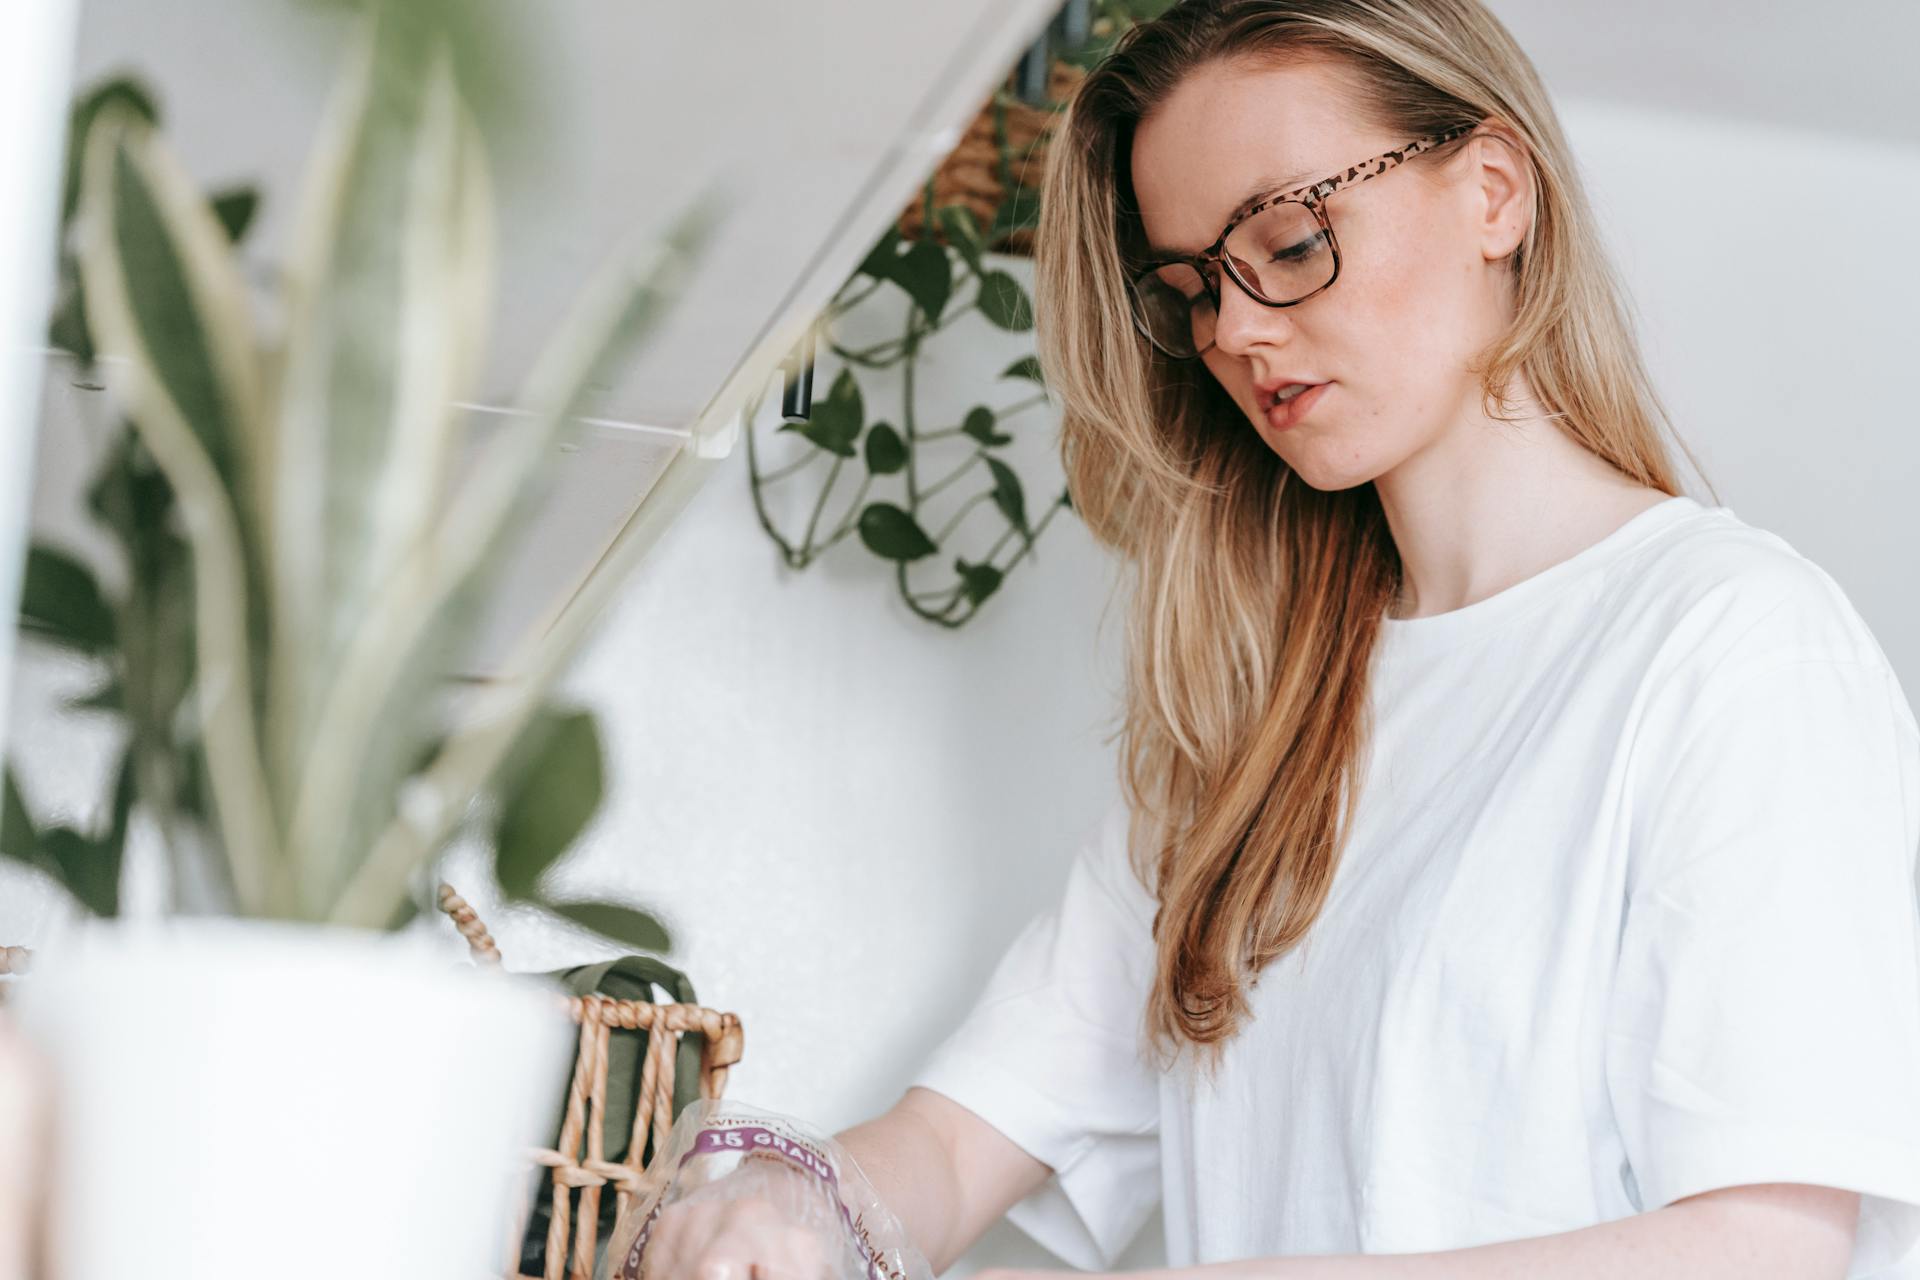 A woman with her hands in a plastic bag | Source: Pexels